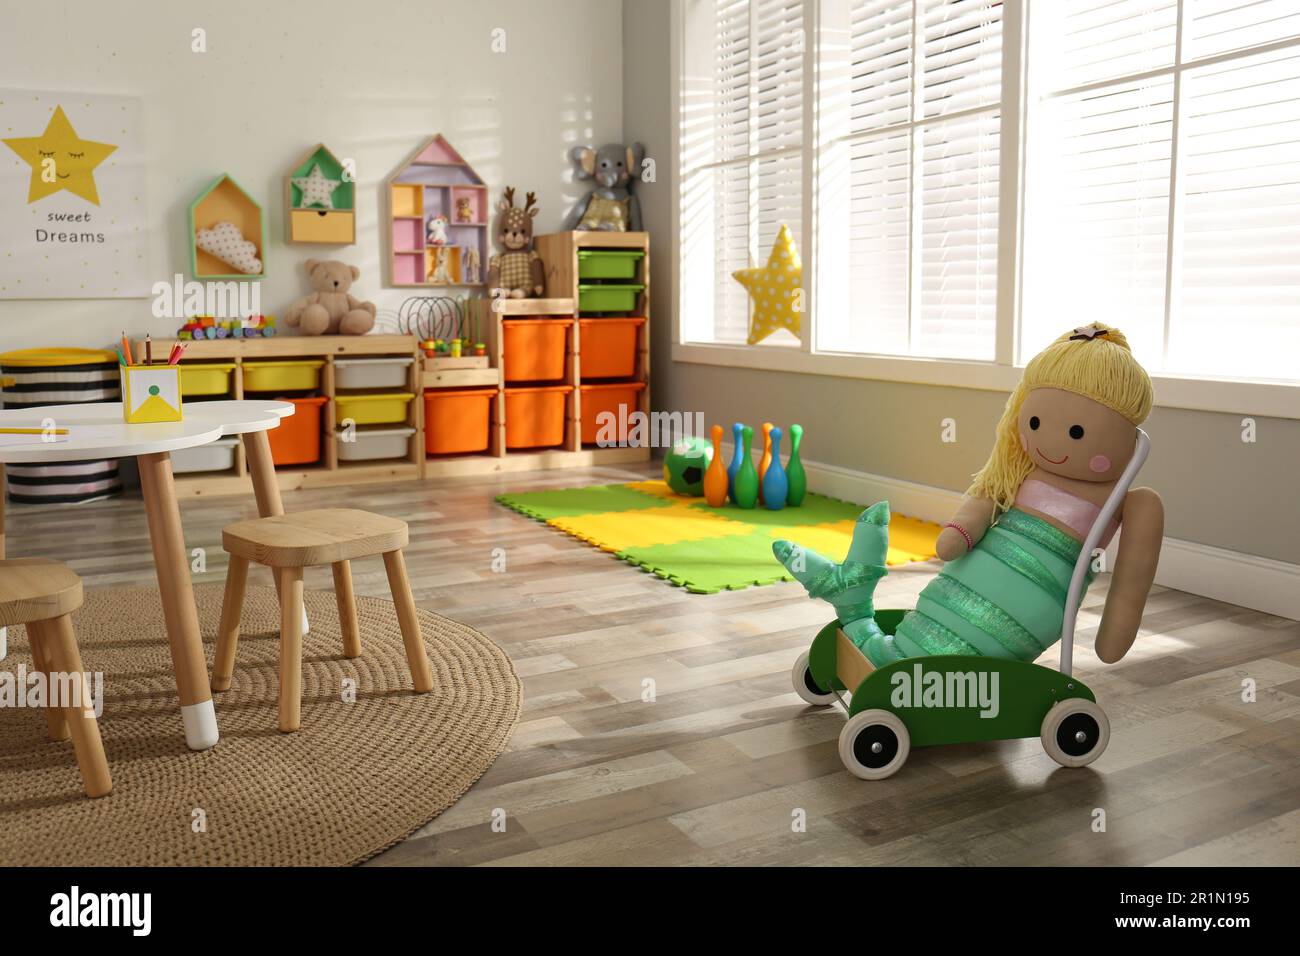 Stylish playroom interior with soft toys and modern furniture Stock Photo